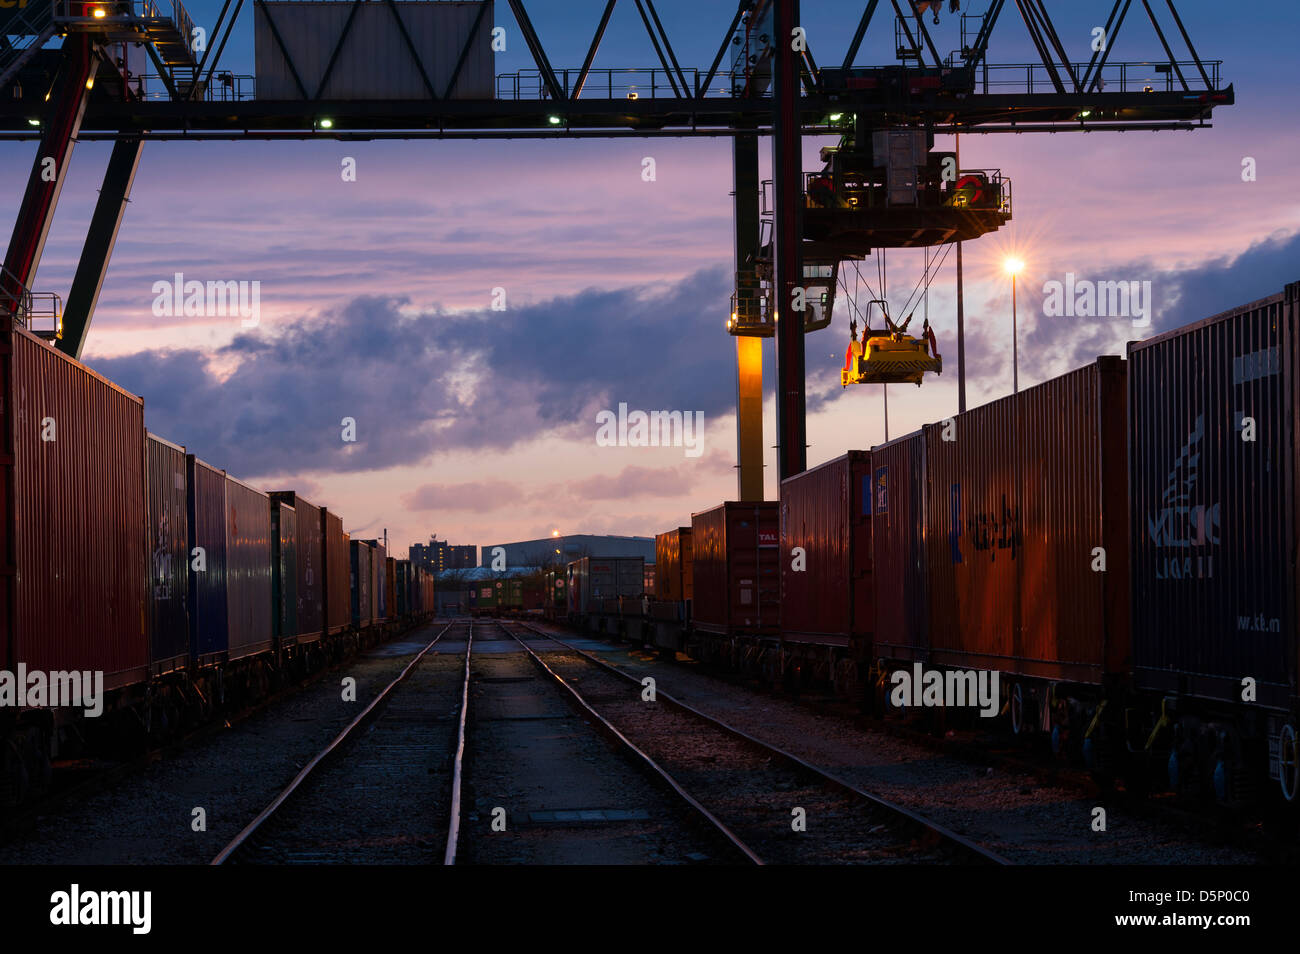 Beautiful view of cranes at Manchester Freightliner railway freight terminal at dusk. Stock Photo